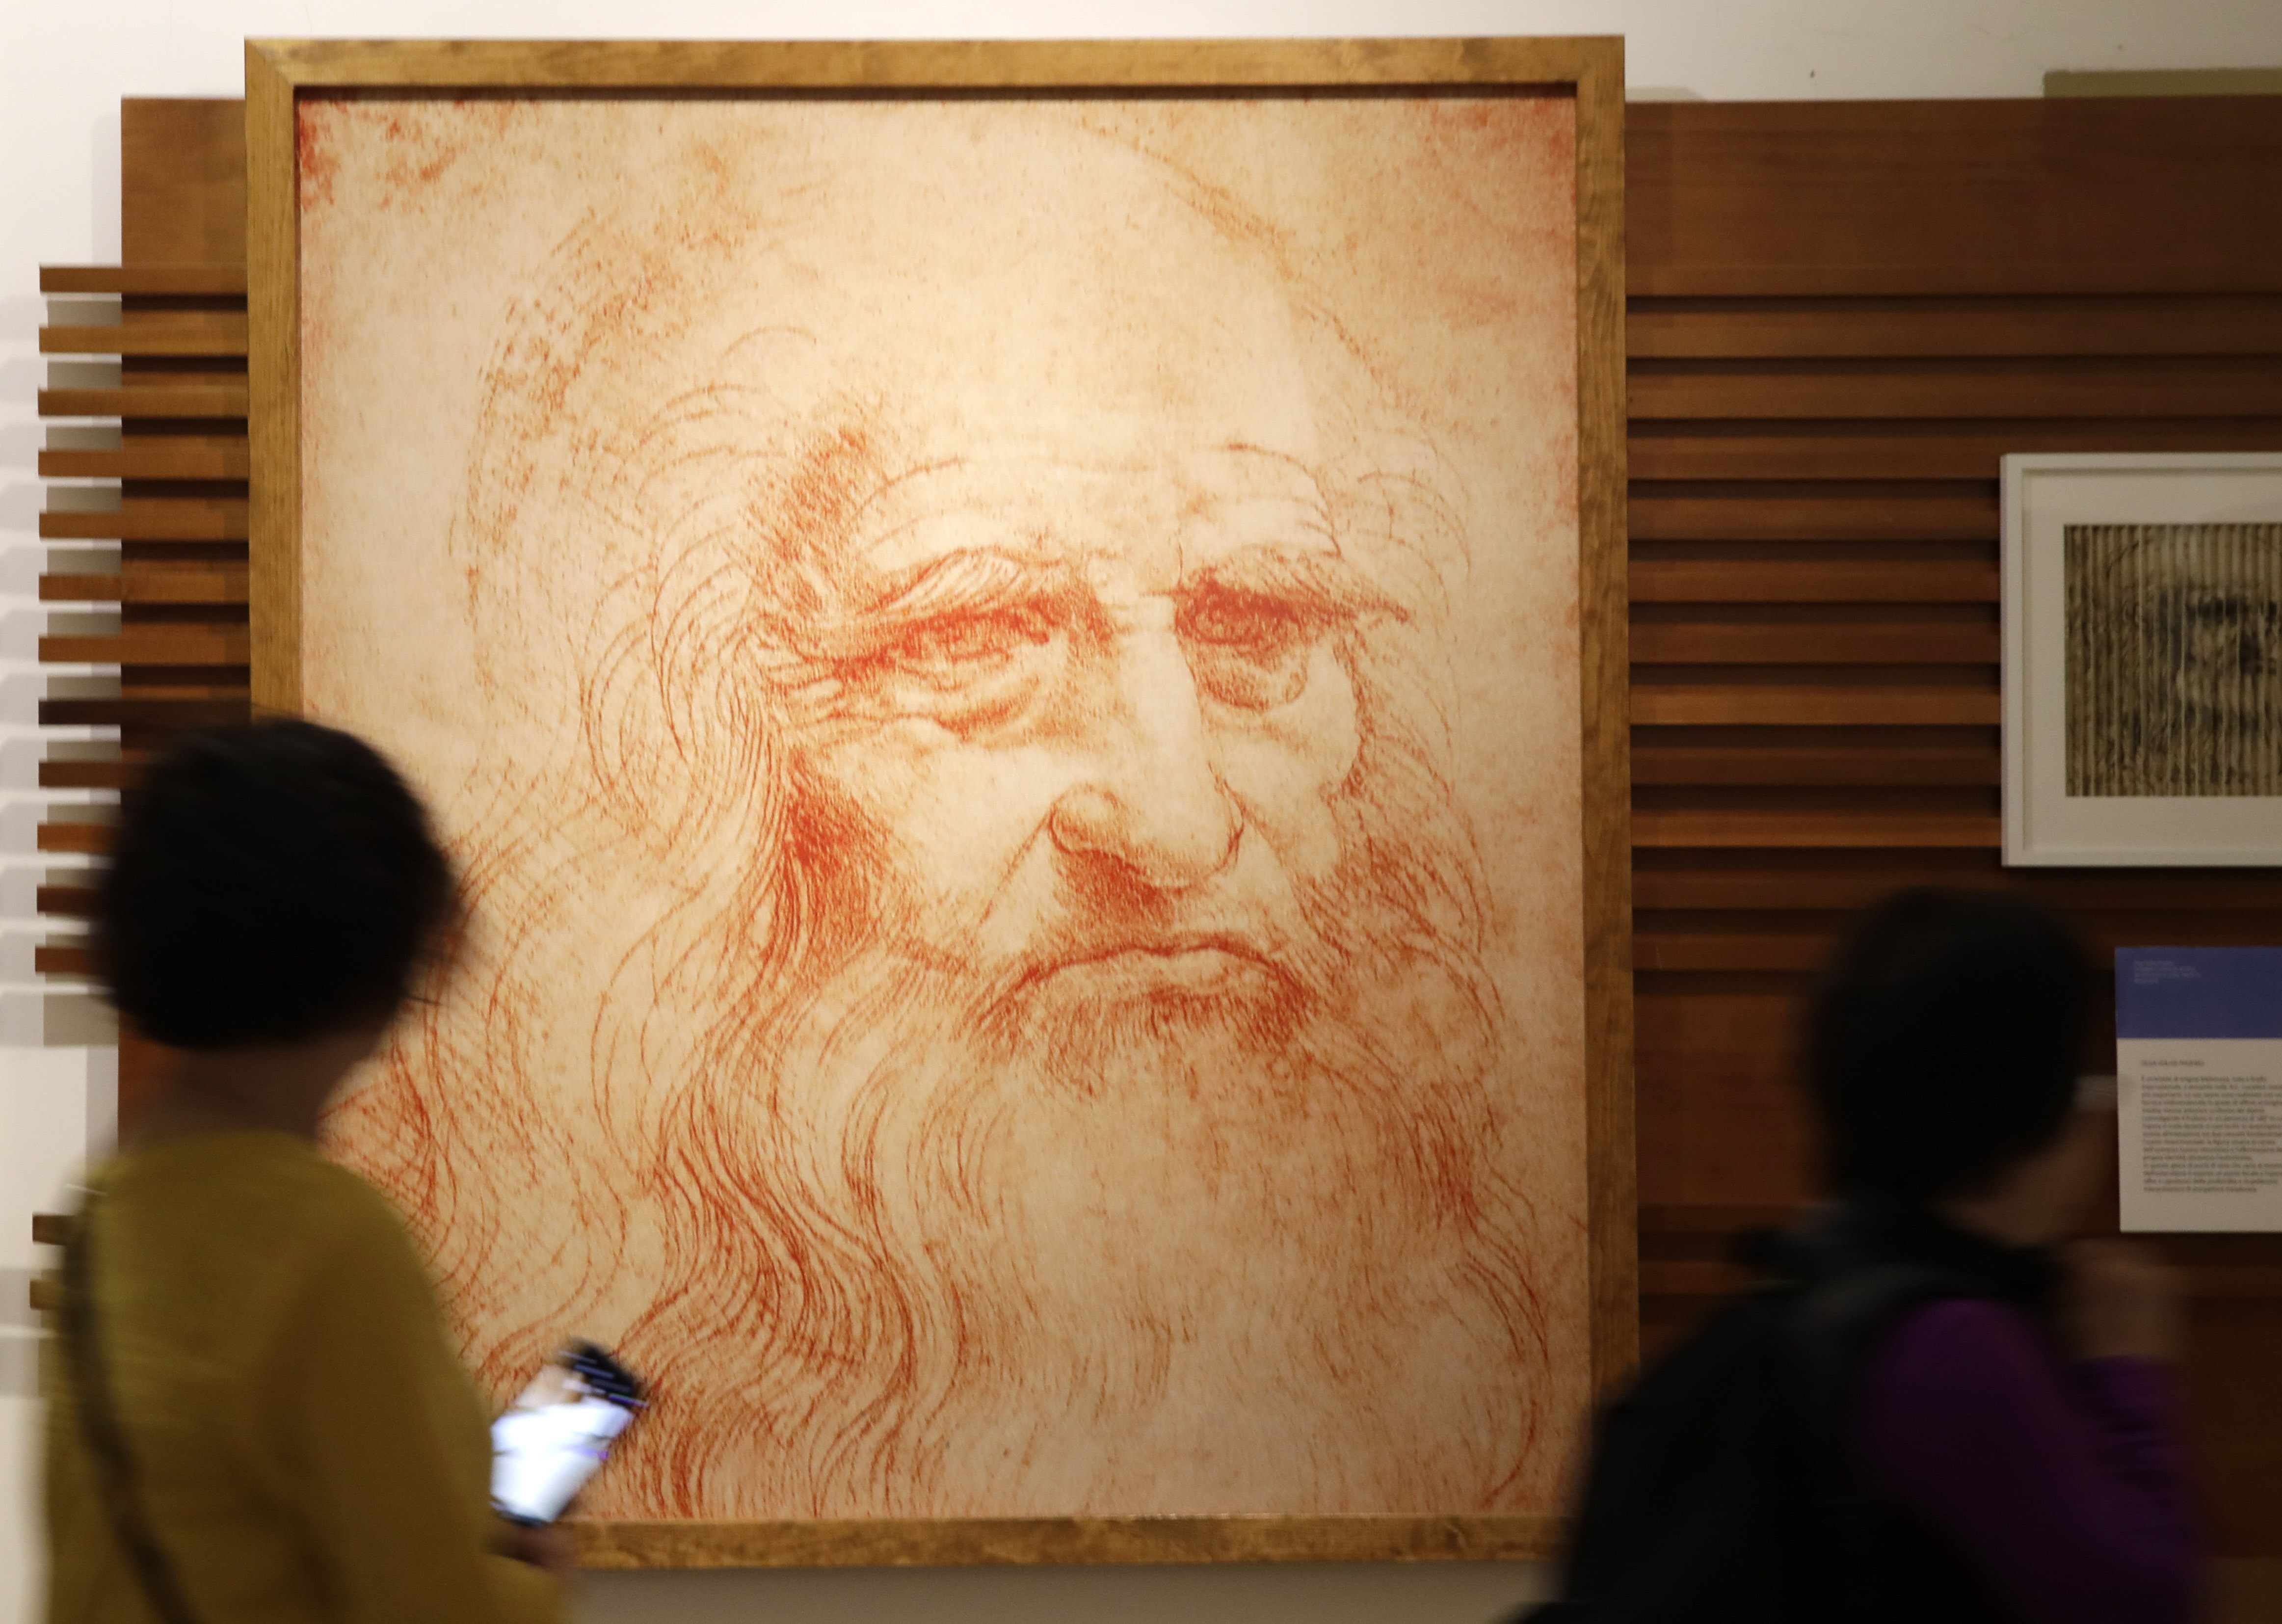 Visitors look at a portrait drawing of Italian Renaissance painter, scientist and inventor Leonardo Da Vinci during a permanent exhibition on Da Vinci, on the exact day commemorating the 500th anniversary of his death, in Rome, Thursday, May 2, 2019. Leonardo died in Amboise, France, on May 2, 1519.  (AP Photo/Alessandra Tarantino)